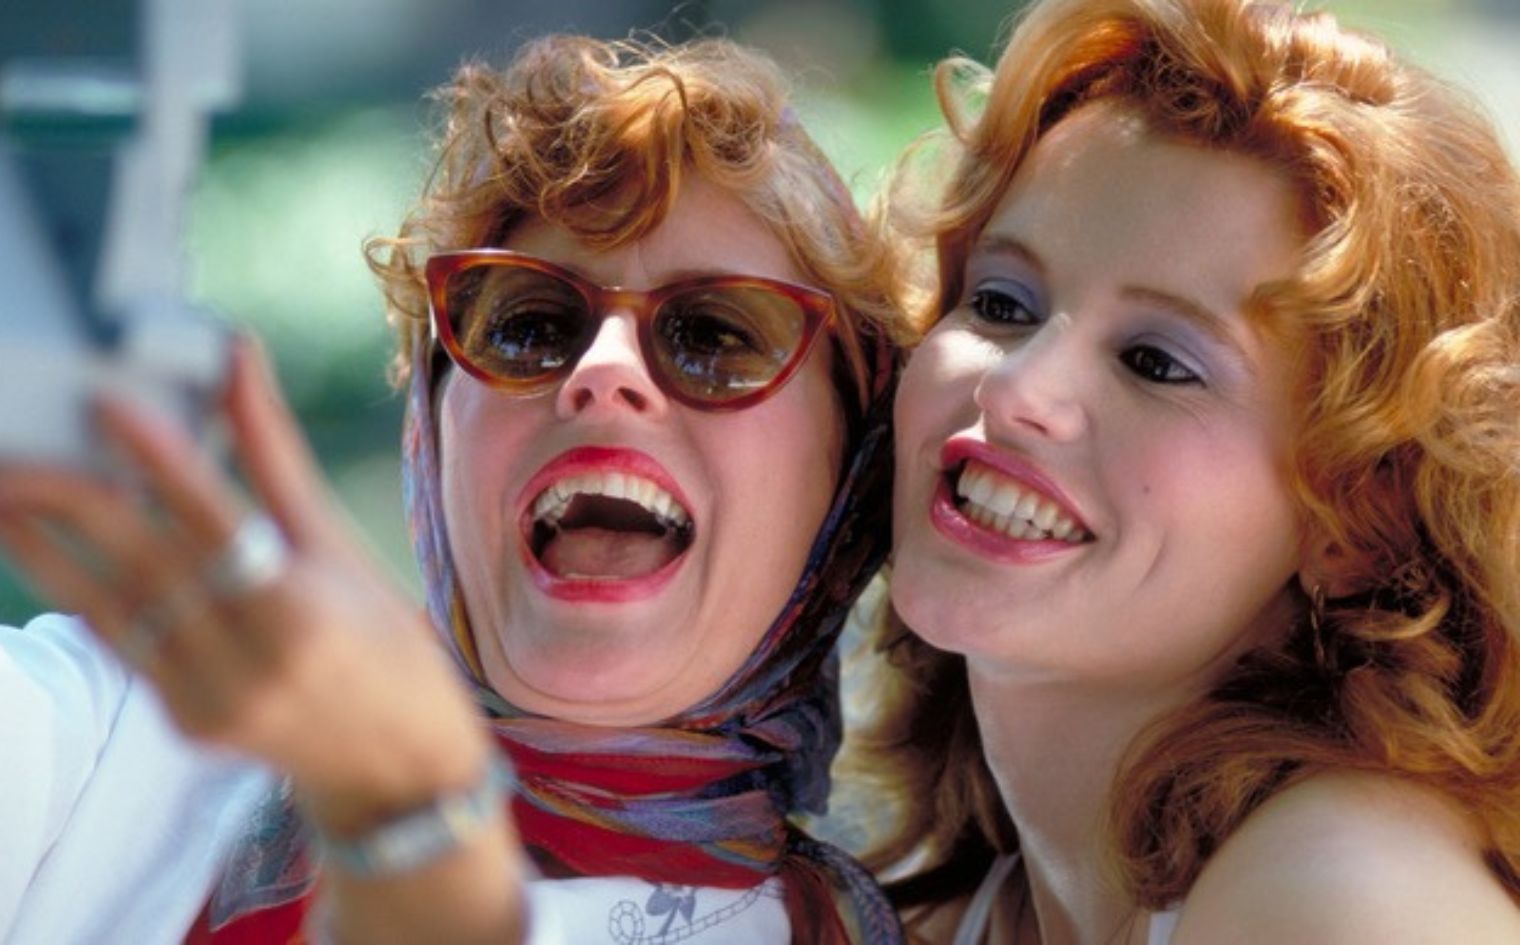 Thelma And Louise: Ridley Scott's Model for All Buddy Movies